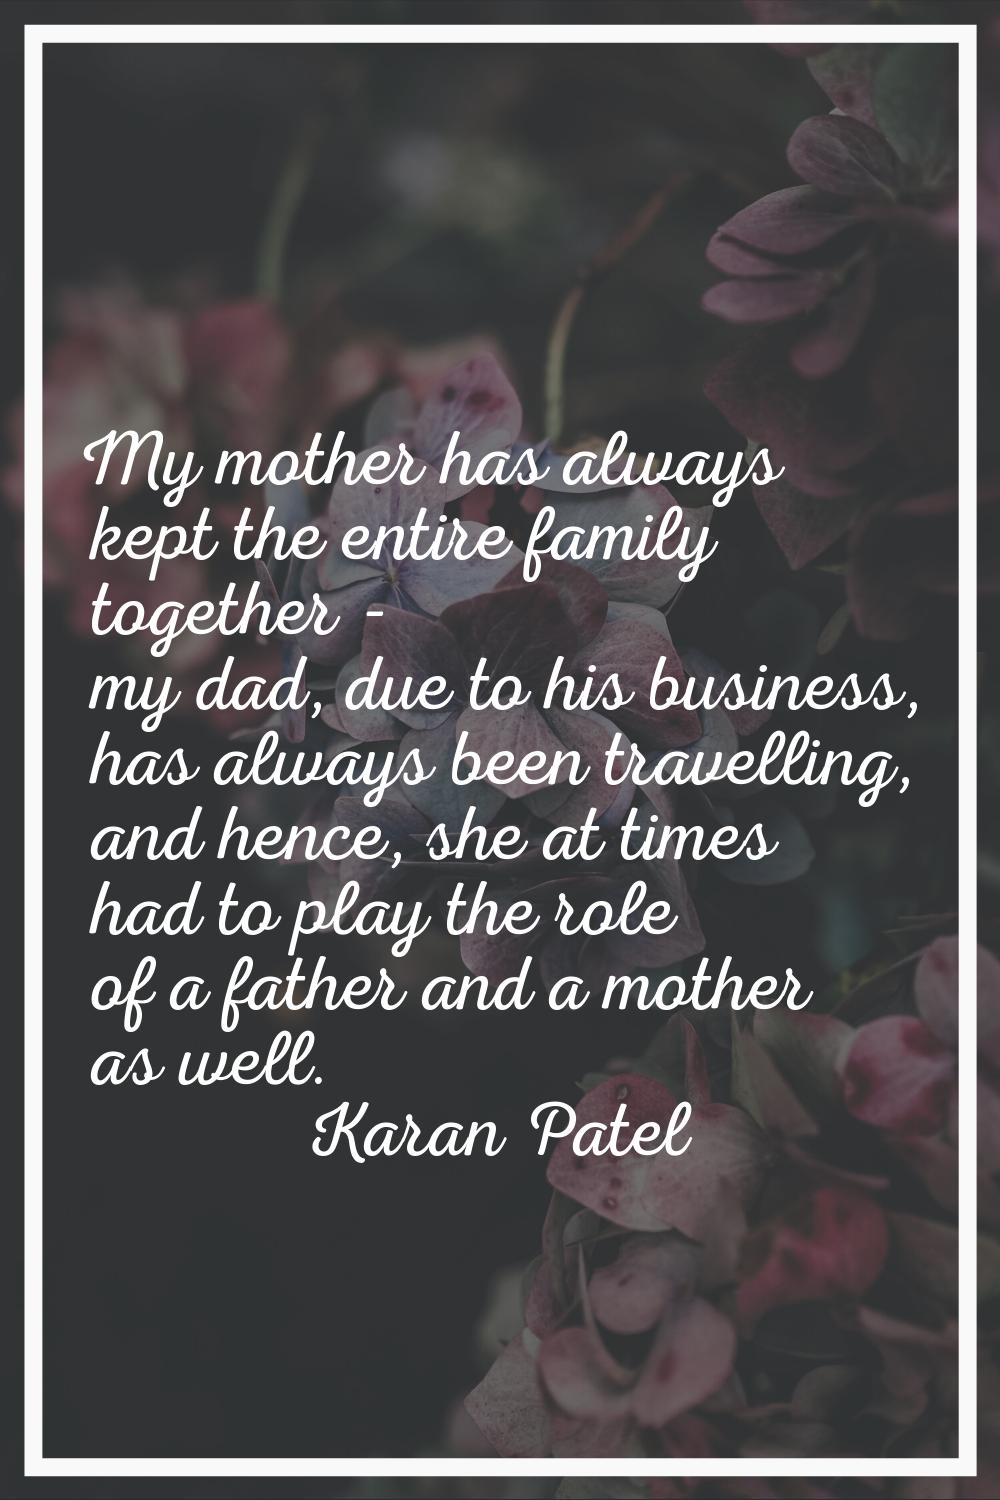 My mother has always kept the entire family together - my dad, due to his business, has always been